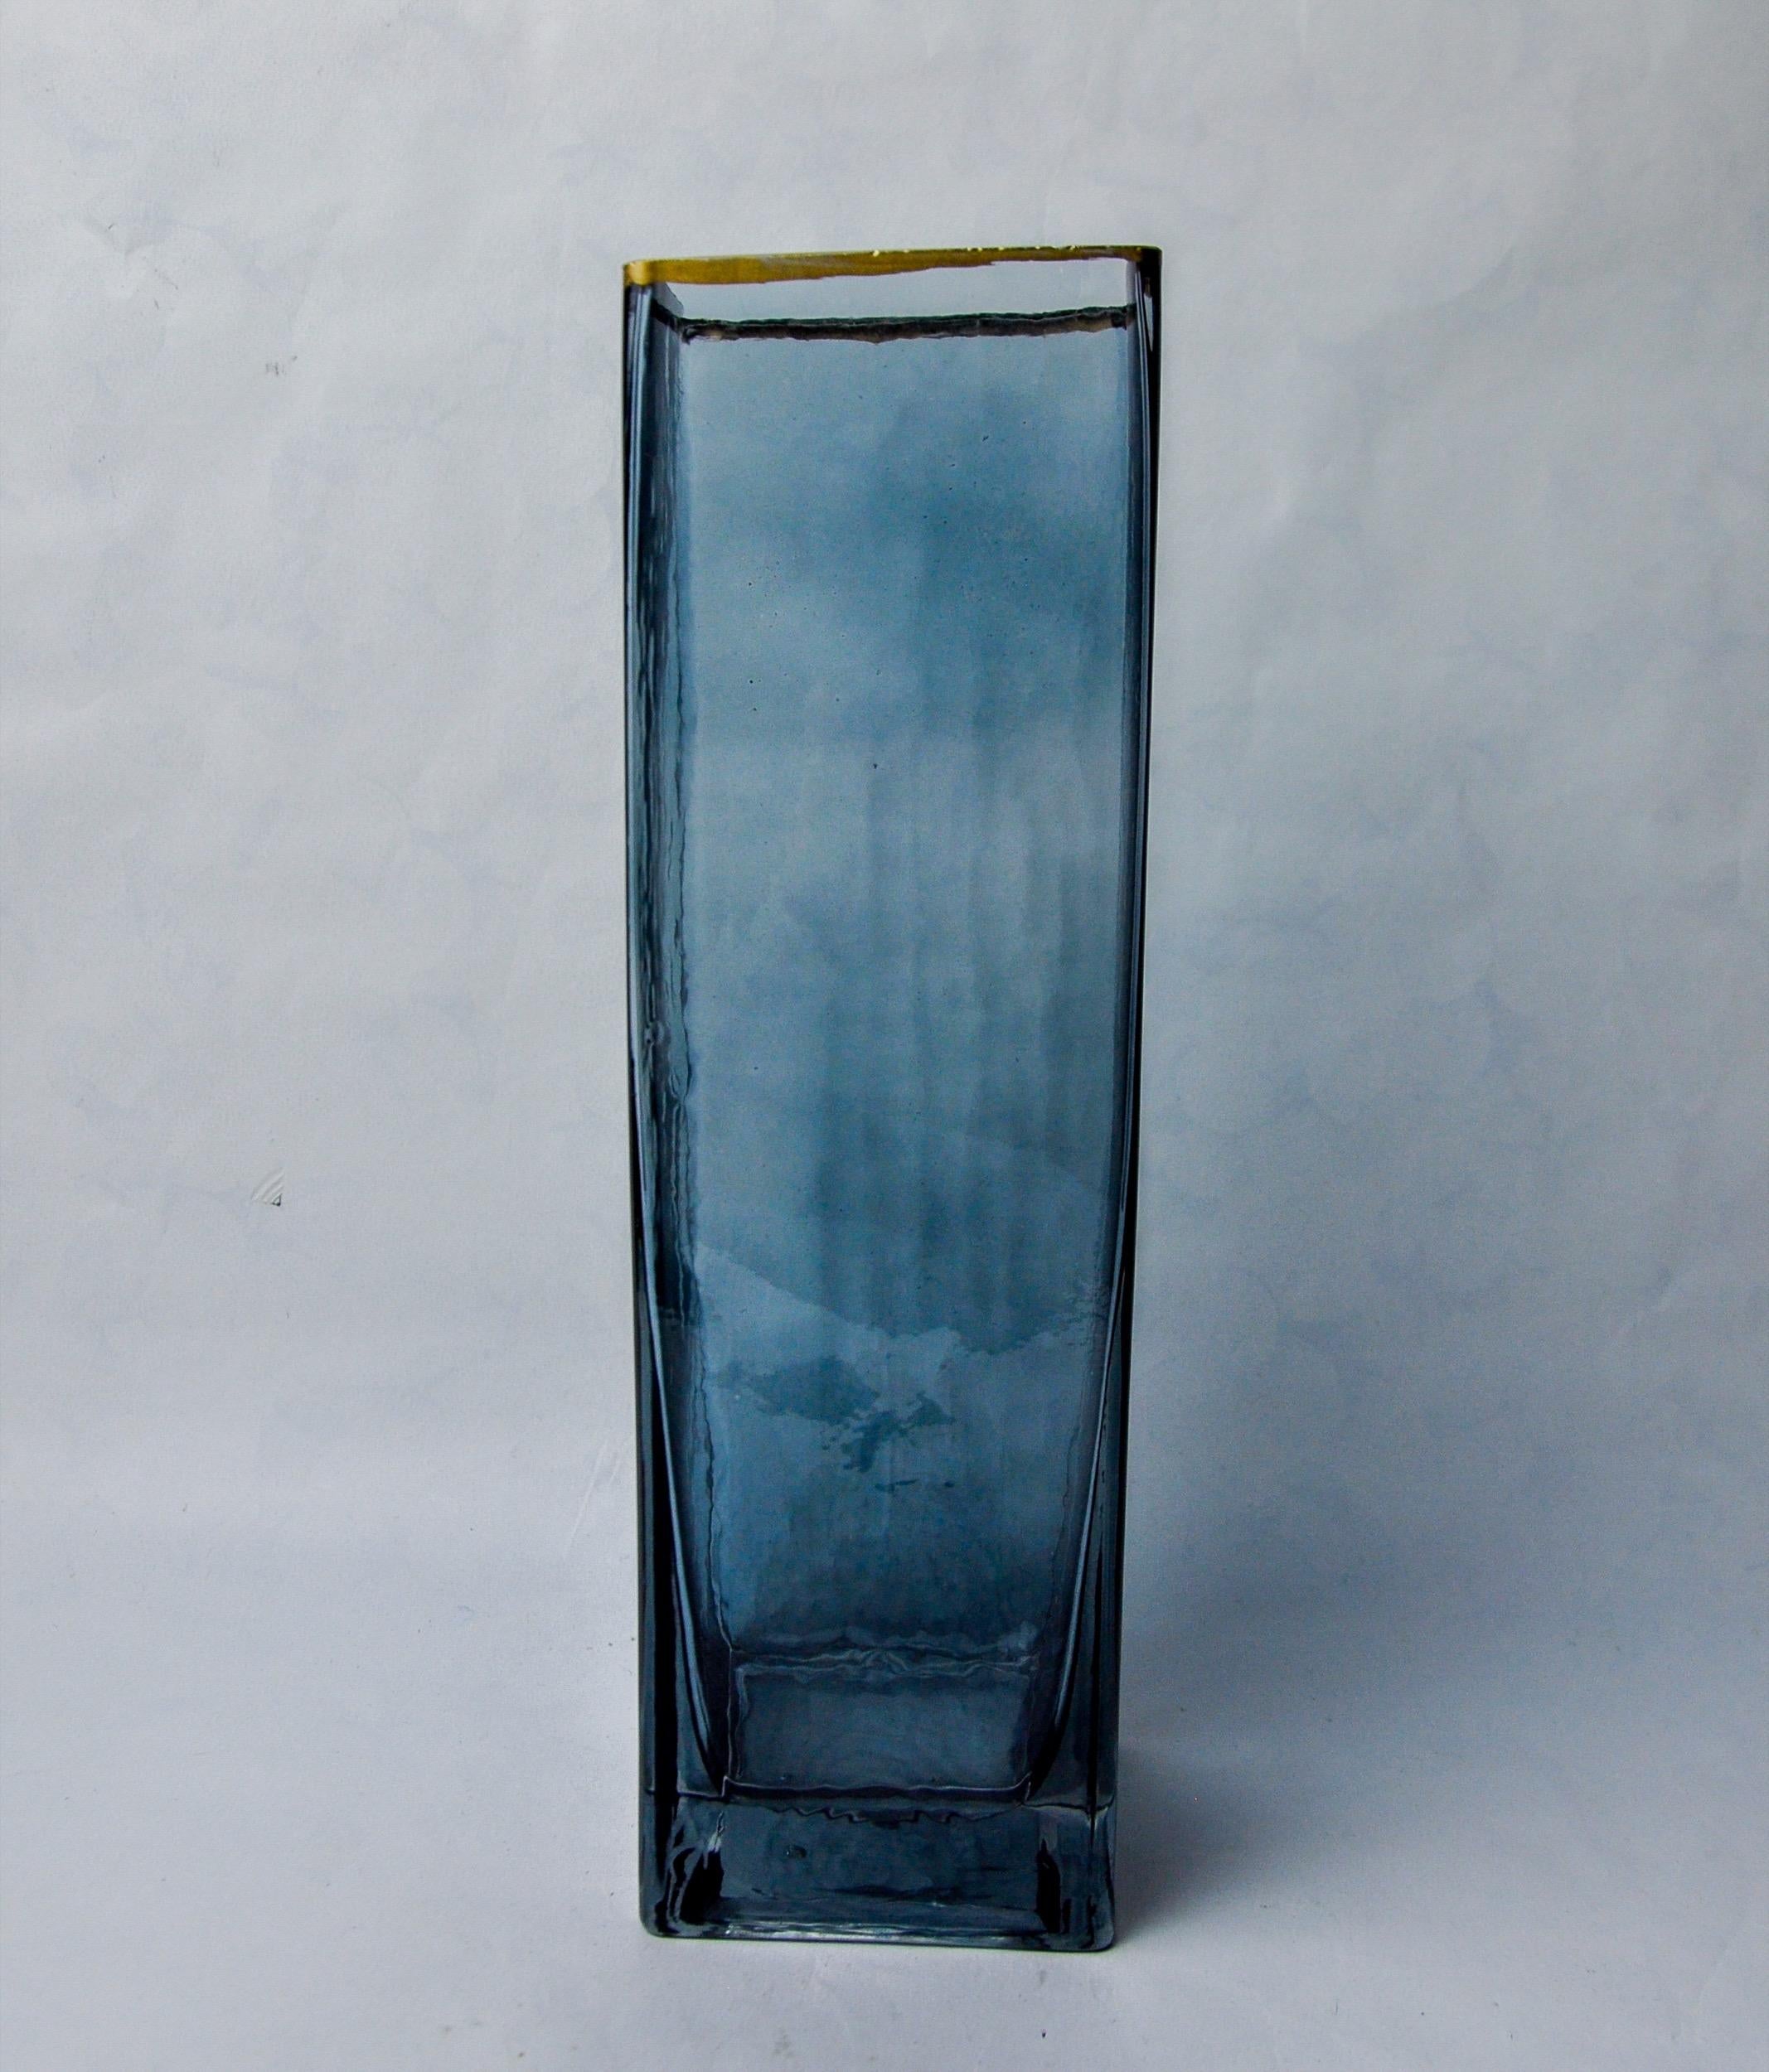 Hollywood Regency Sommerso vase by Petr hora, blue glass, gold edges, Czech Republic, 1970 For Sale